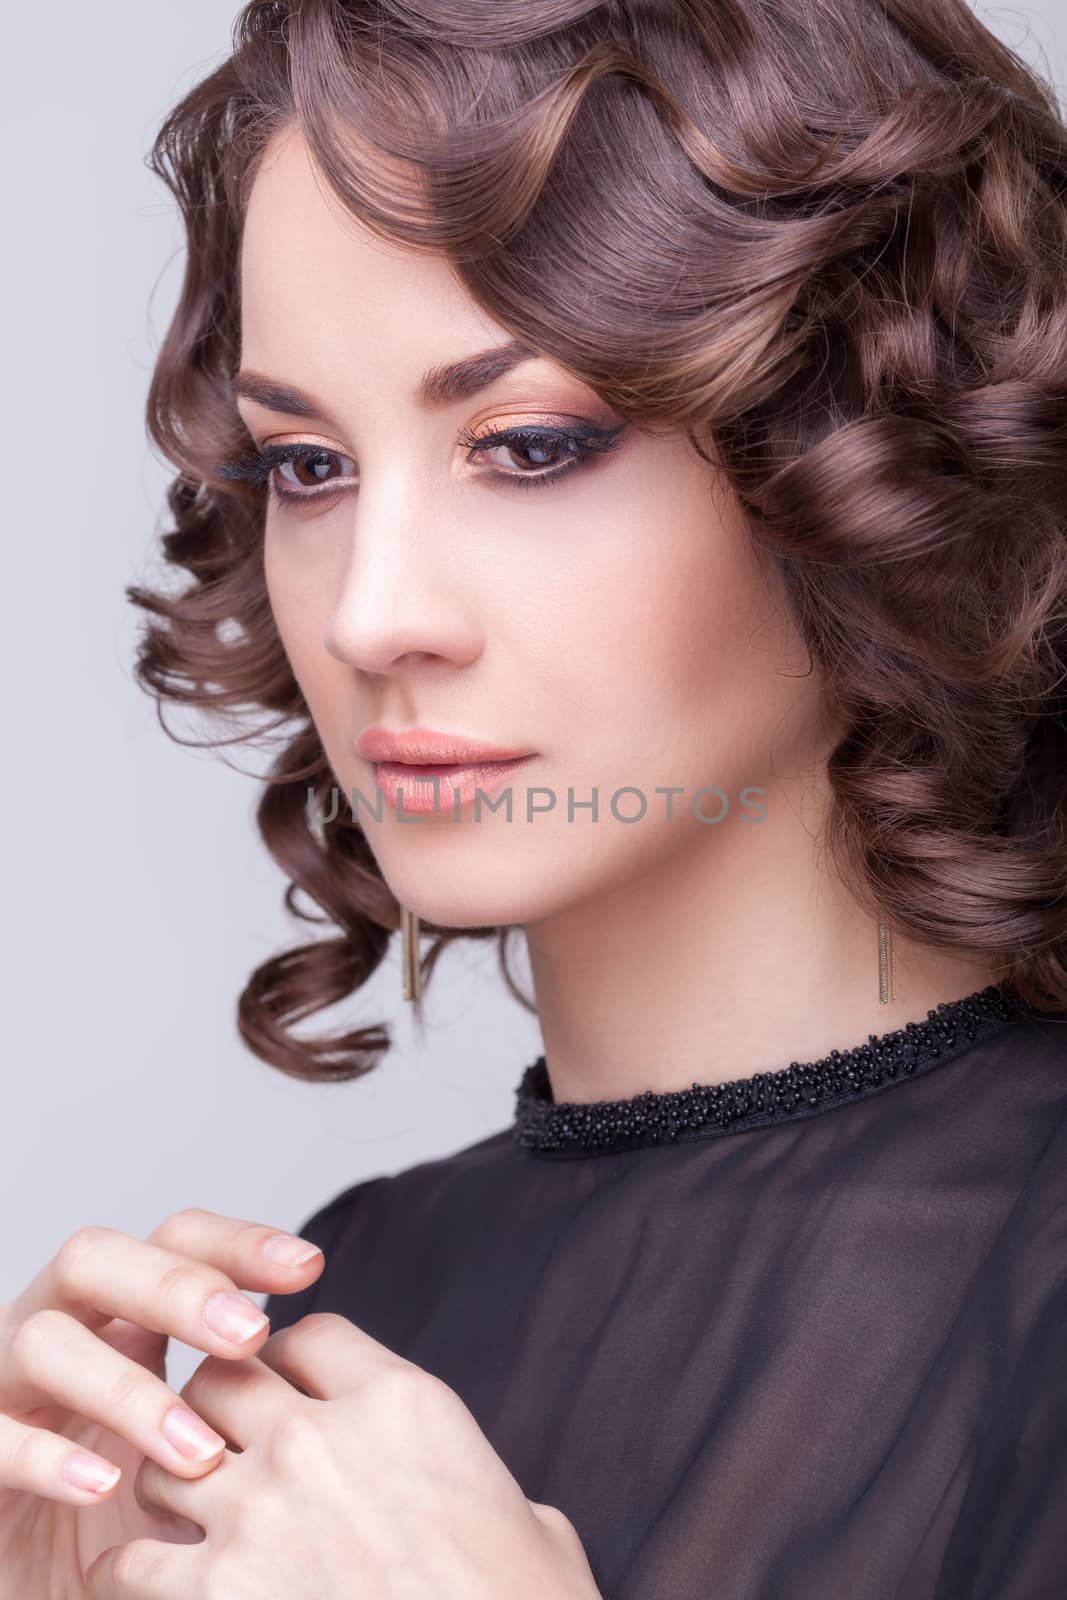 Sensual woman professional make up on grey background studio shooting. Elegant hairstyle. Clean skin with texture